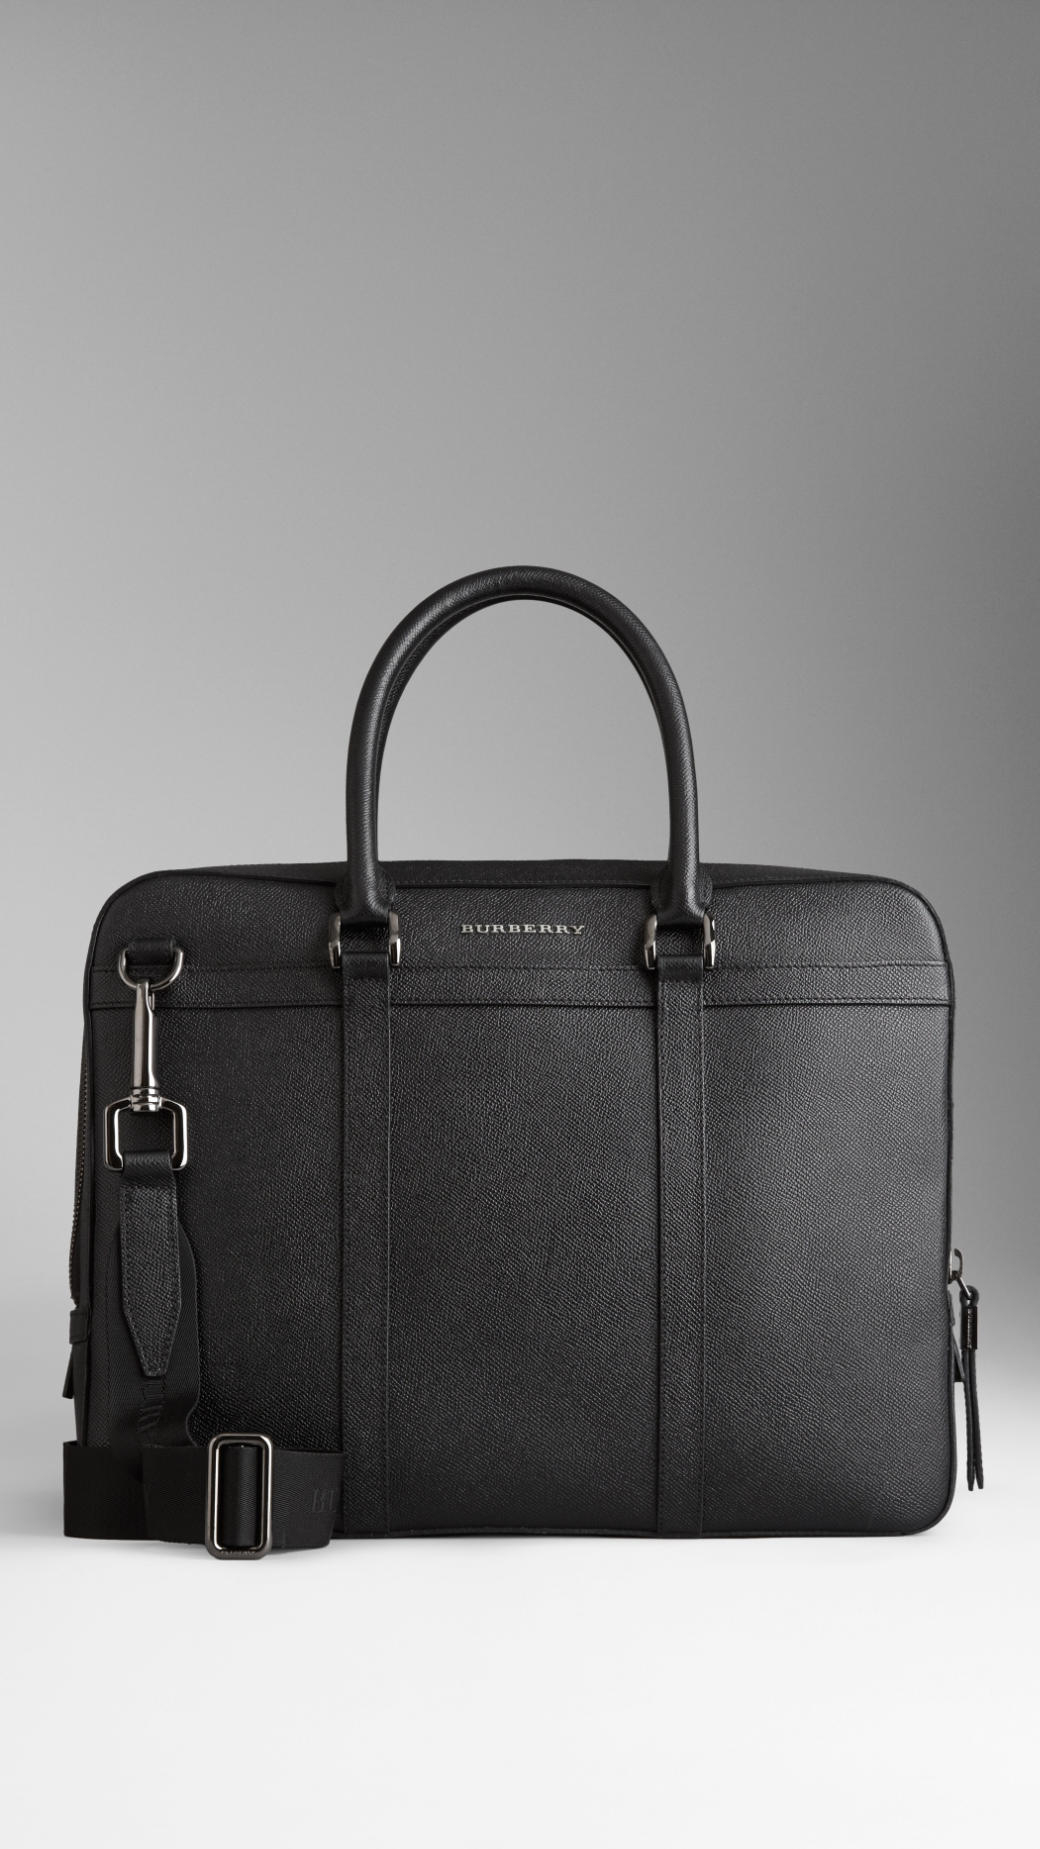 Lyst - Burberry London Leather Briefcase in Black for Men